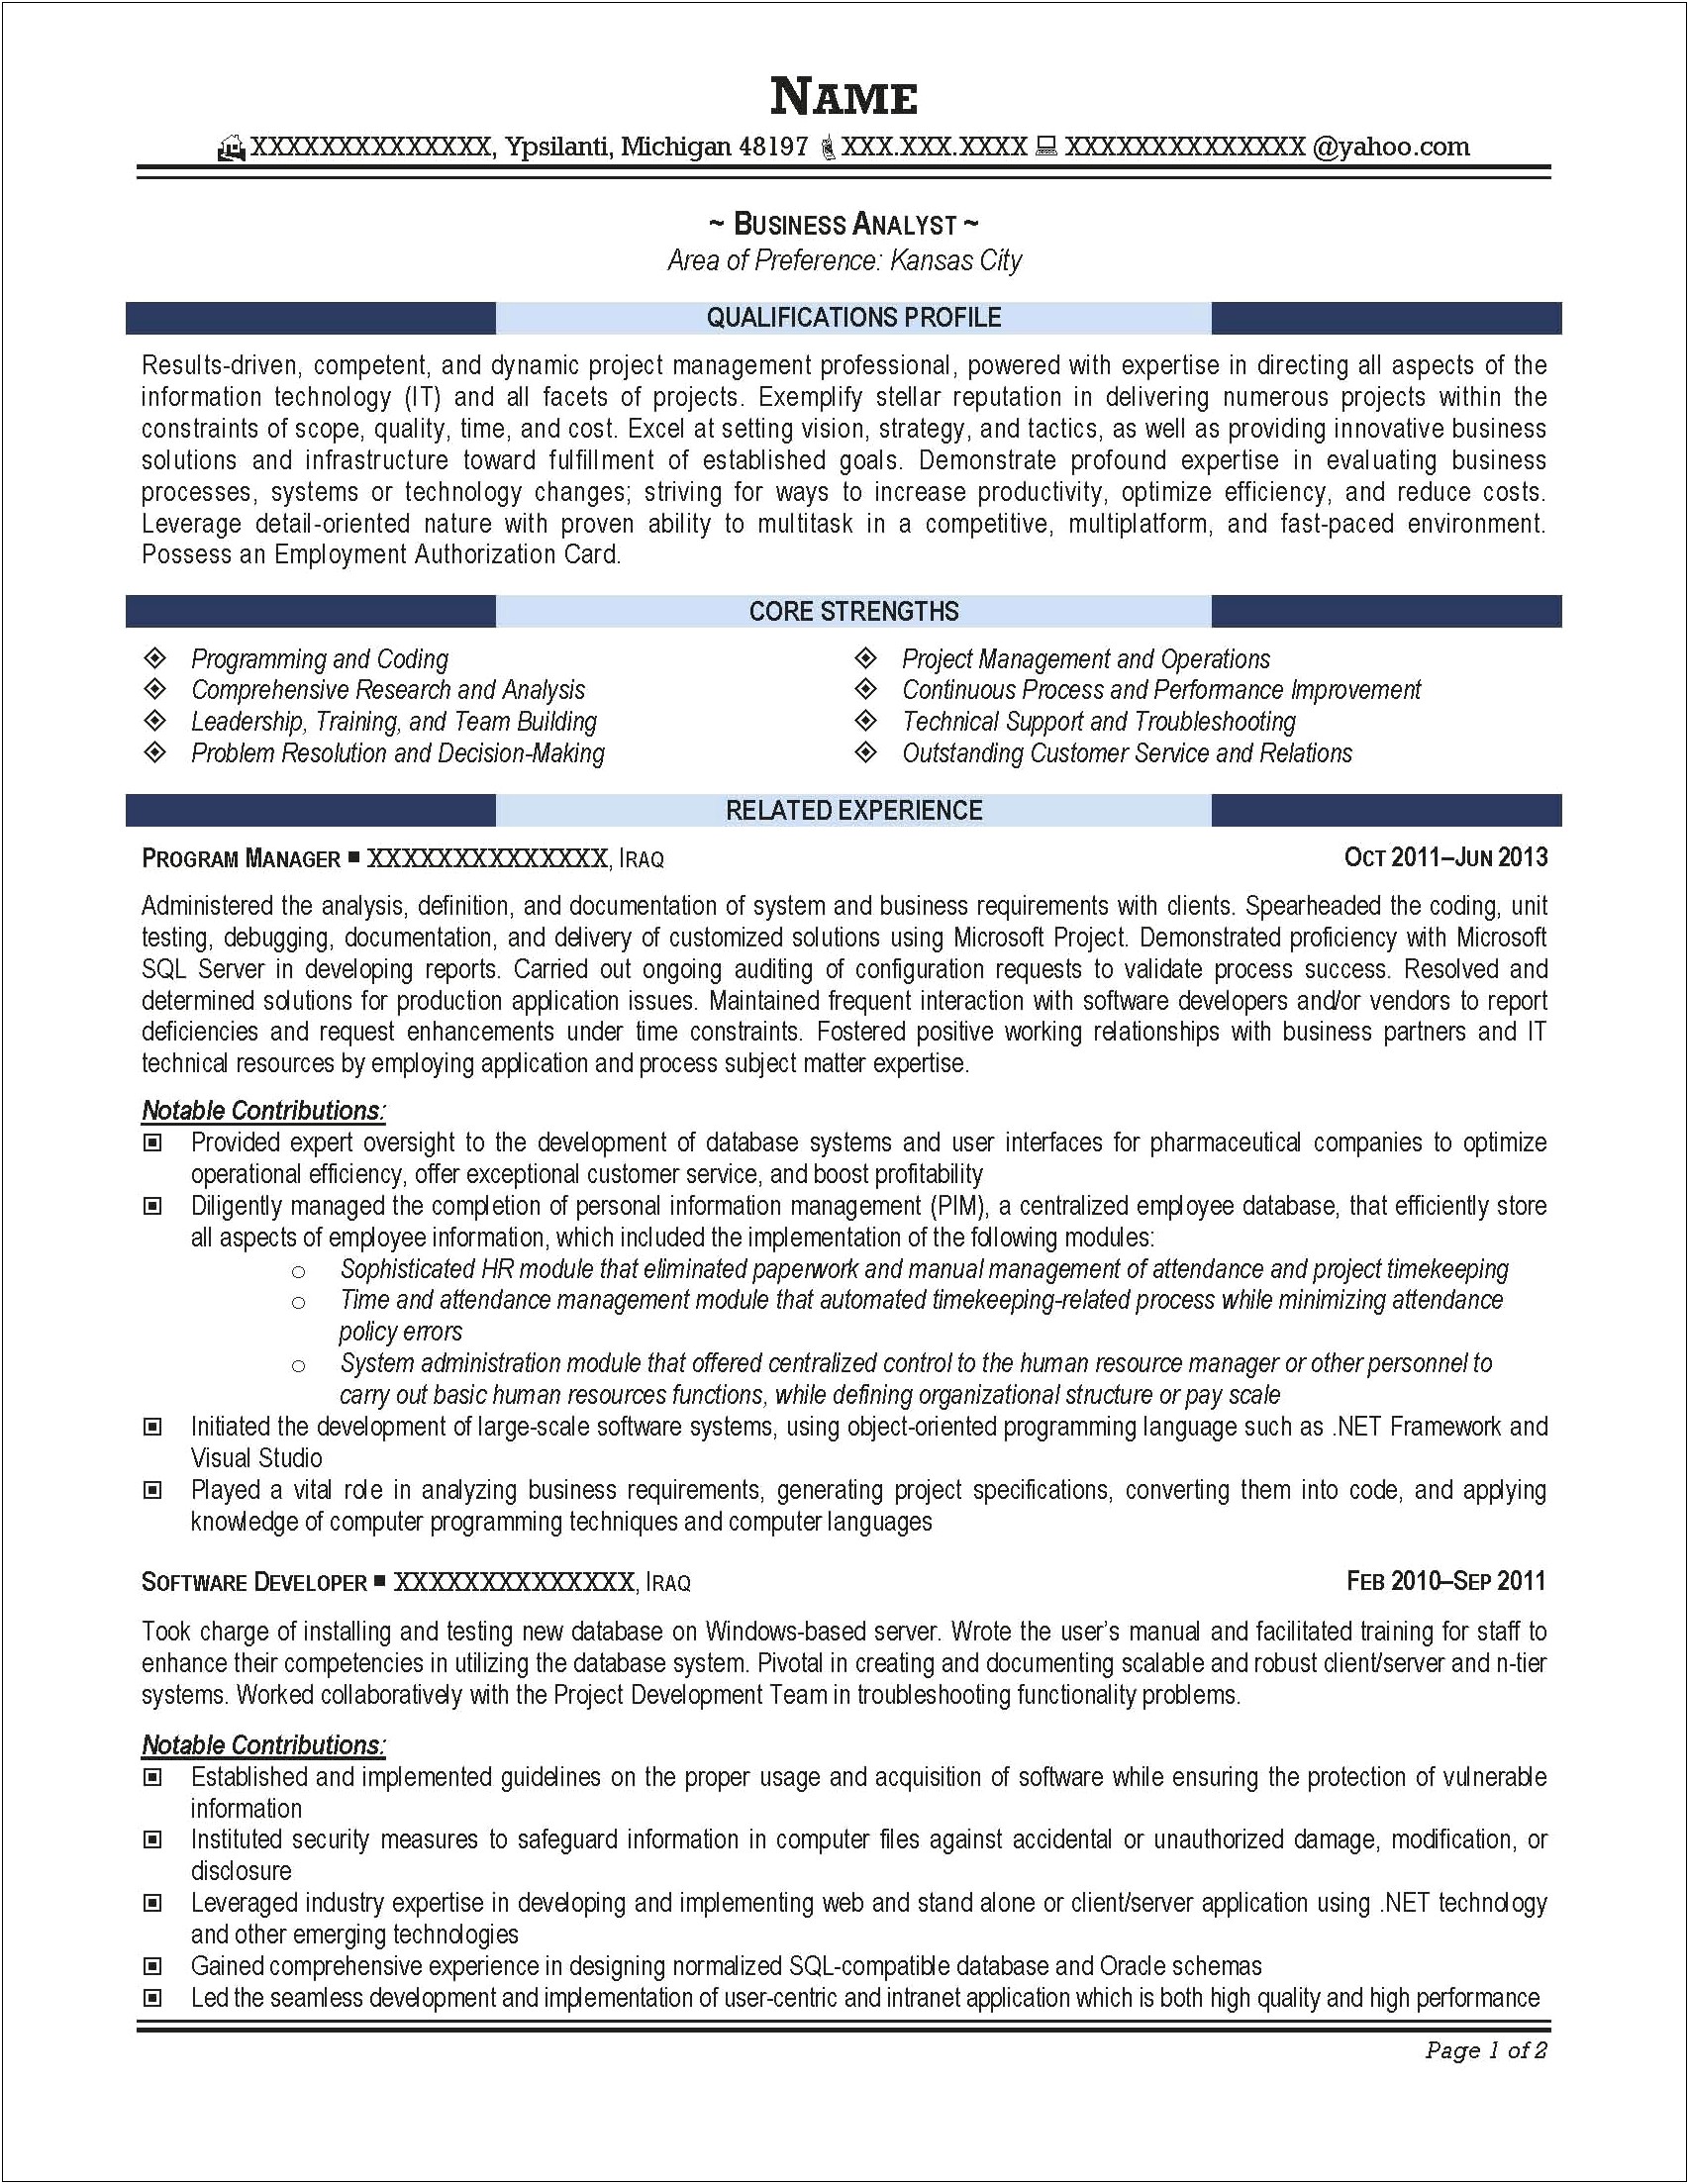 Experience Summary On Technical Support Analyst Resume Example